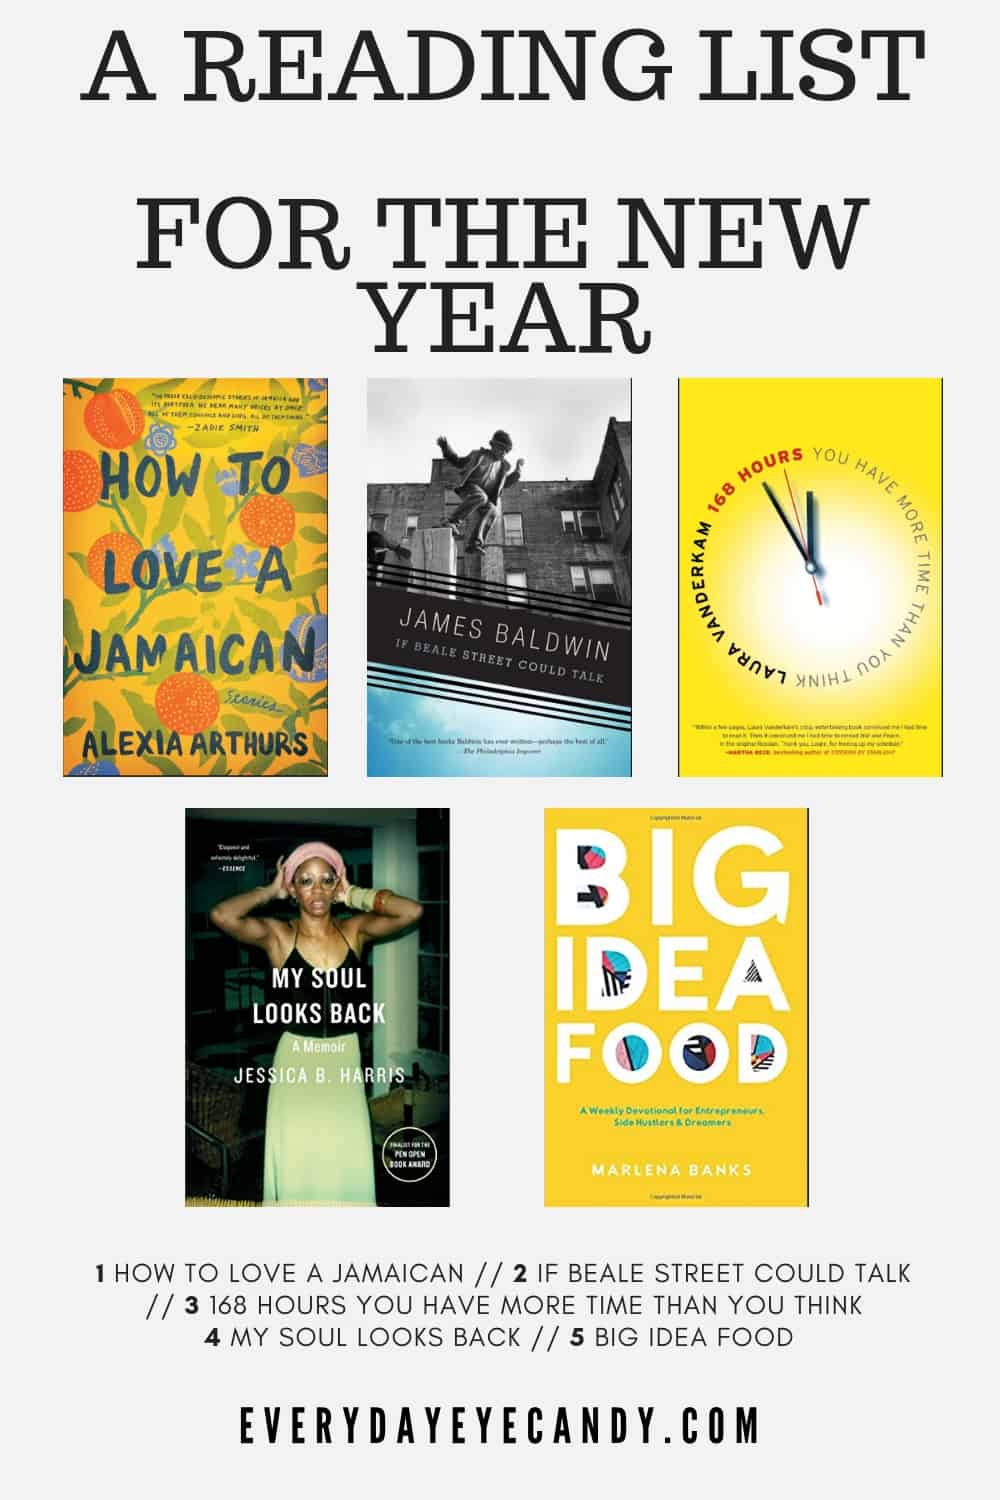 READING LIST FOR THE NEW YEAR